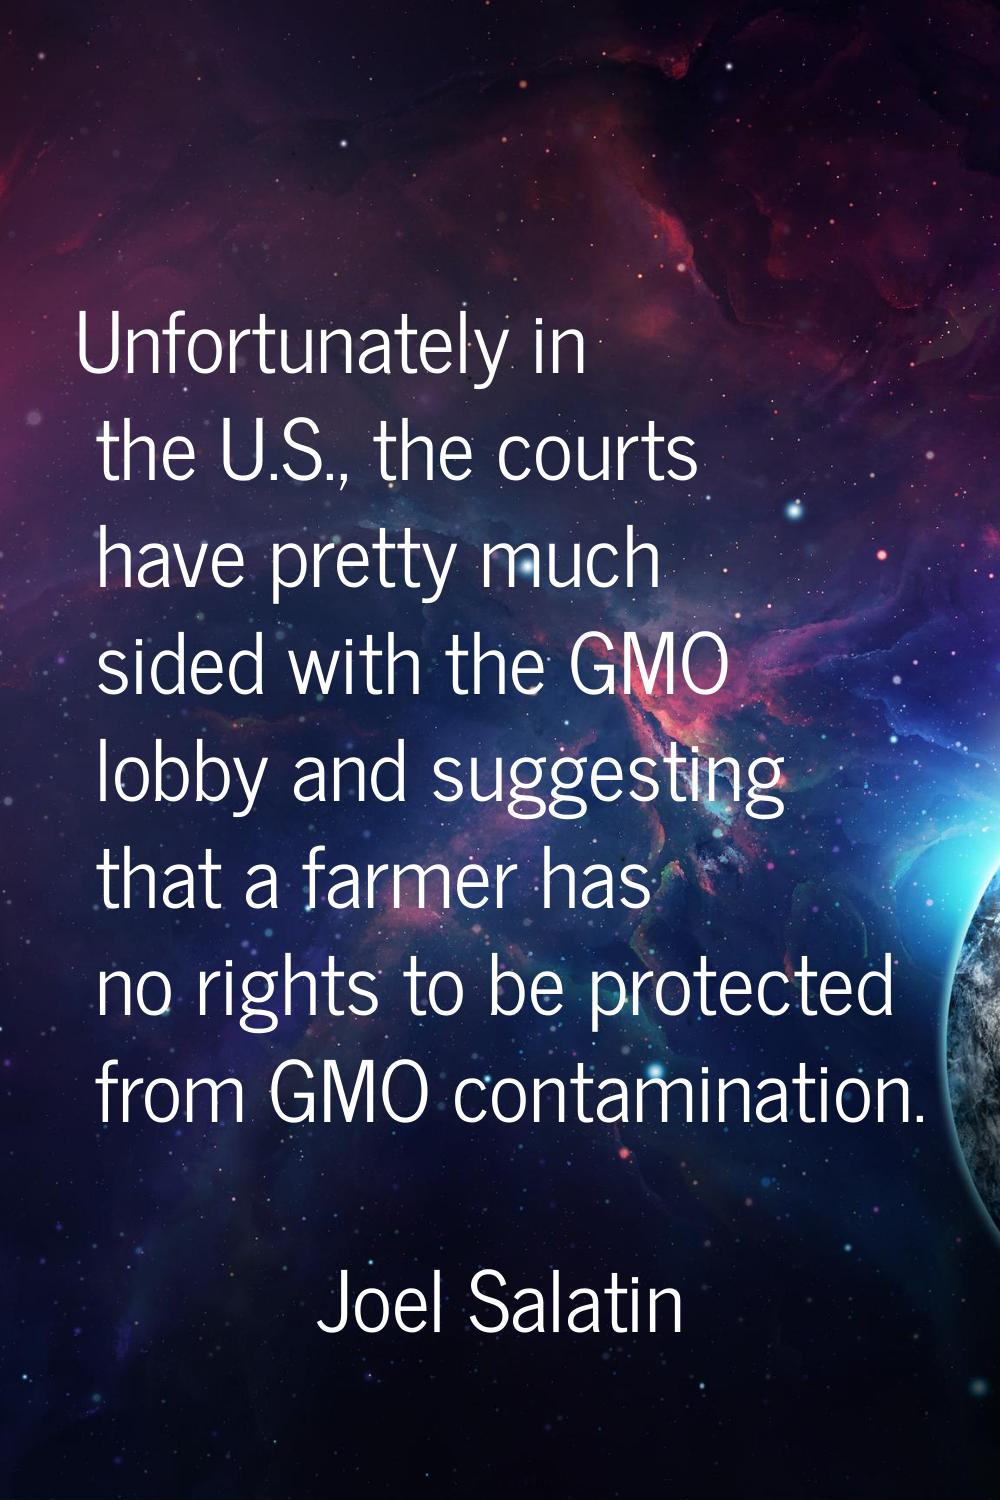 Unfortunately in the U.S., the courts have pretty much sided with the GMO lobby and suggesting that